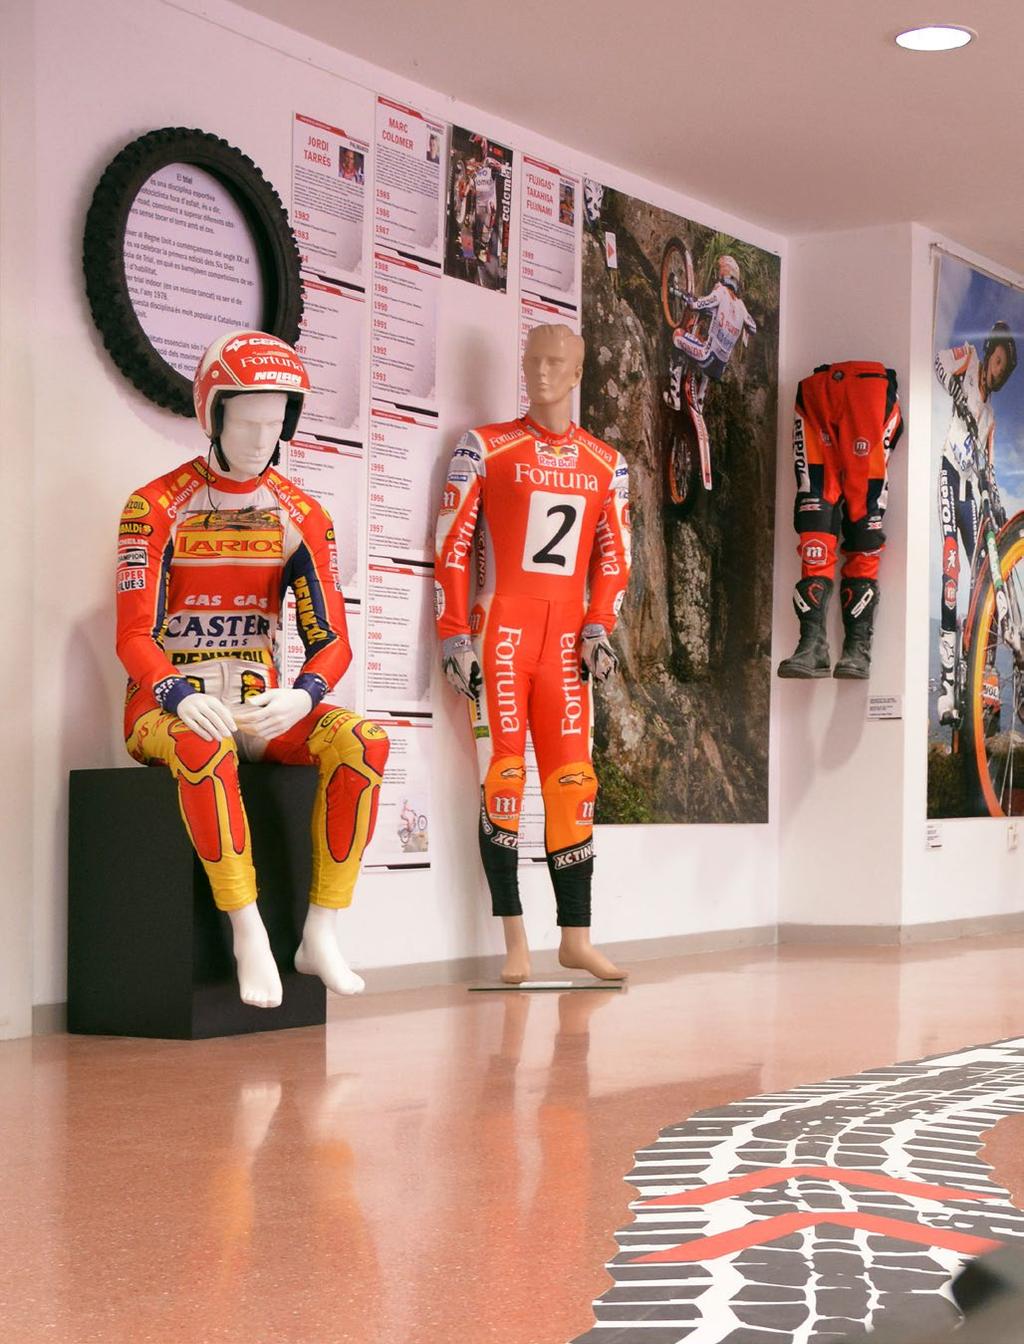 Trial: in the foreground, Jordi Tarrés (Gas Gas team, 1980s-1990s), the first rider to carry sponsorship printed on his clothing, in the background